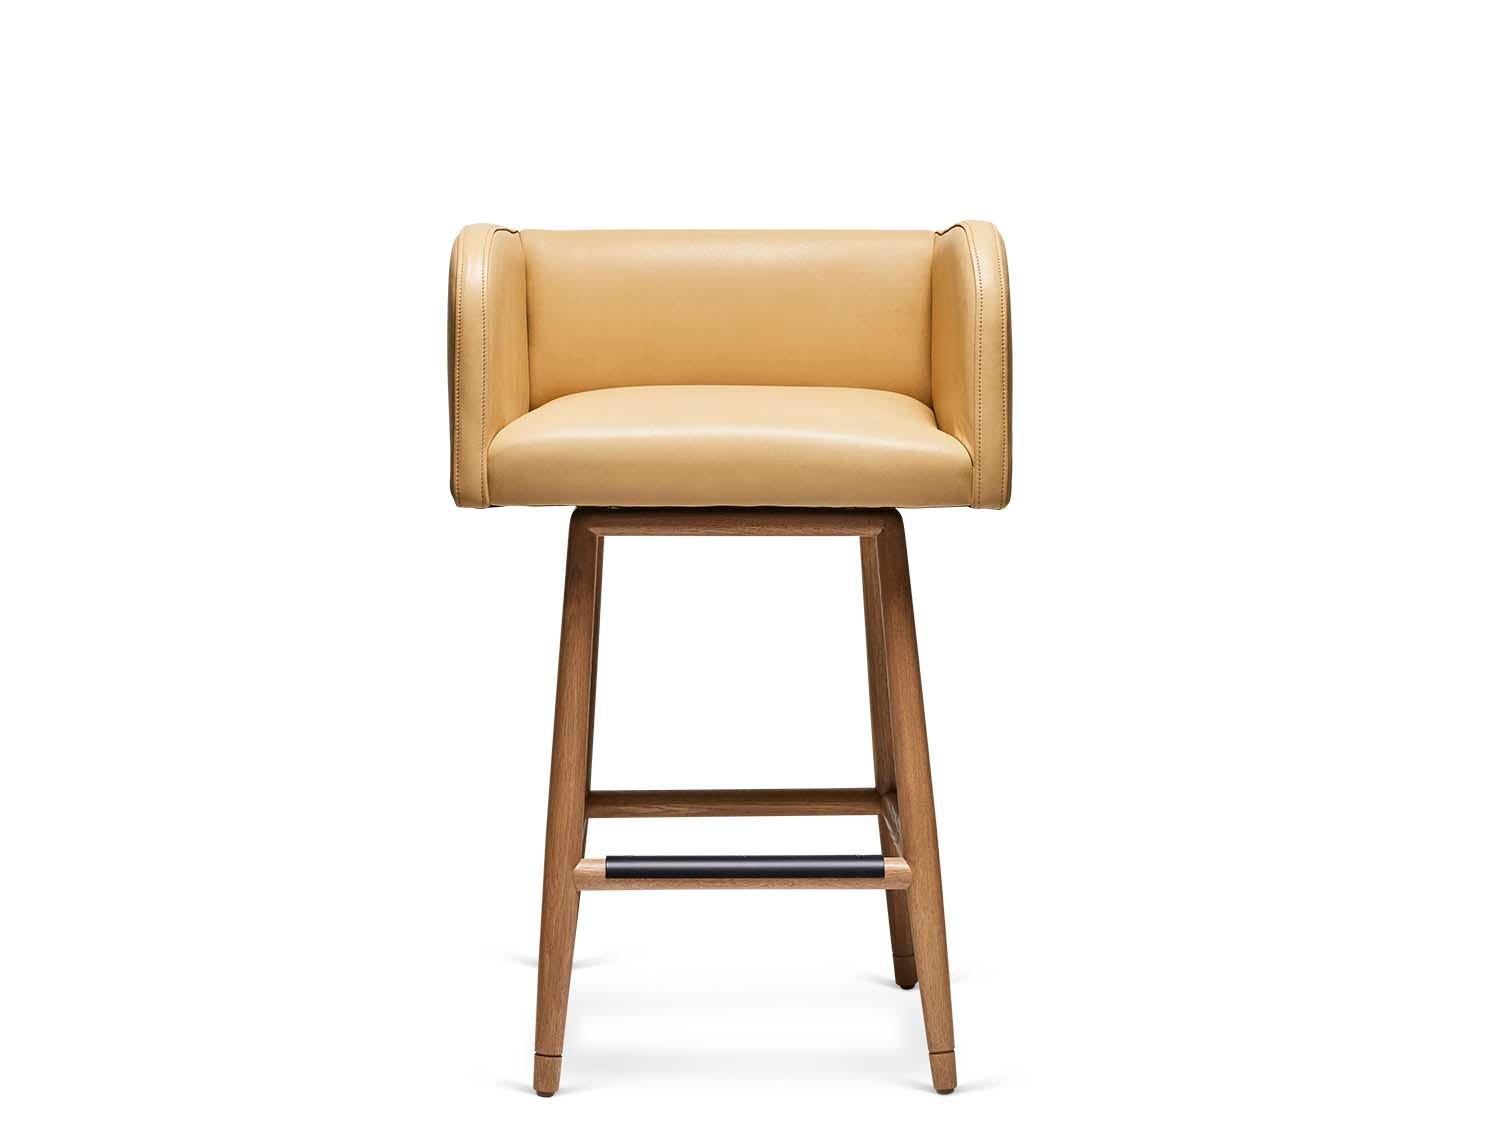 The Moreno Barstool with swivel sits low with Italian inspired arms and incised details on a solid walnut or oak base. Available to order in counter height. 

The Lawson-Fenning Collection is designed and handmade in Los Angeles, California. Reach